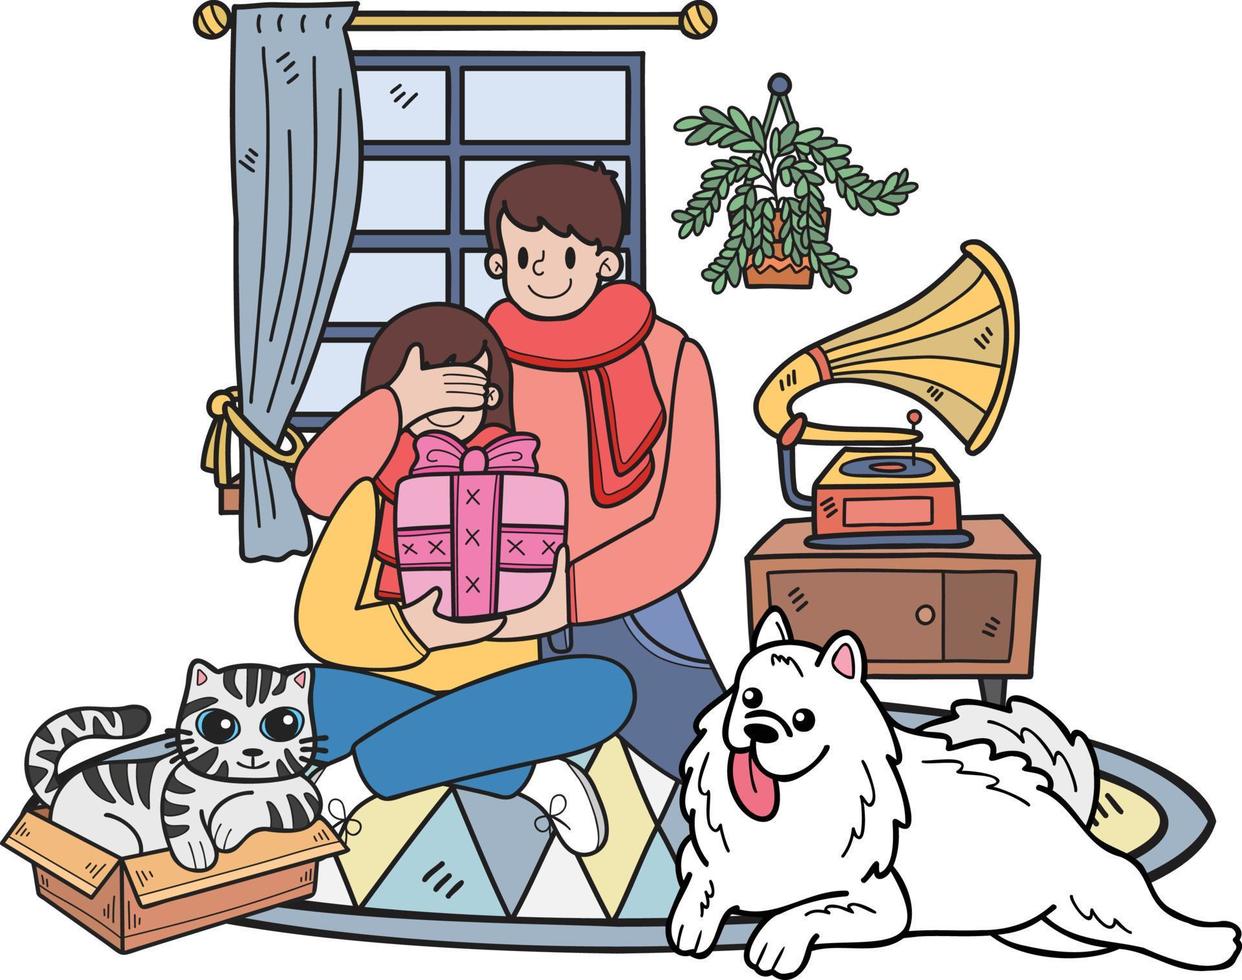 Hand Drawn Men give gifts to women with dogs and cats illustration in doodle style vector